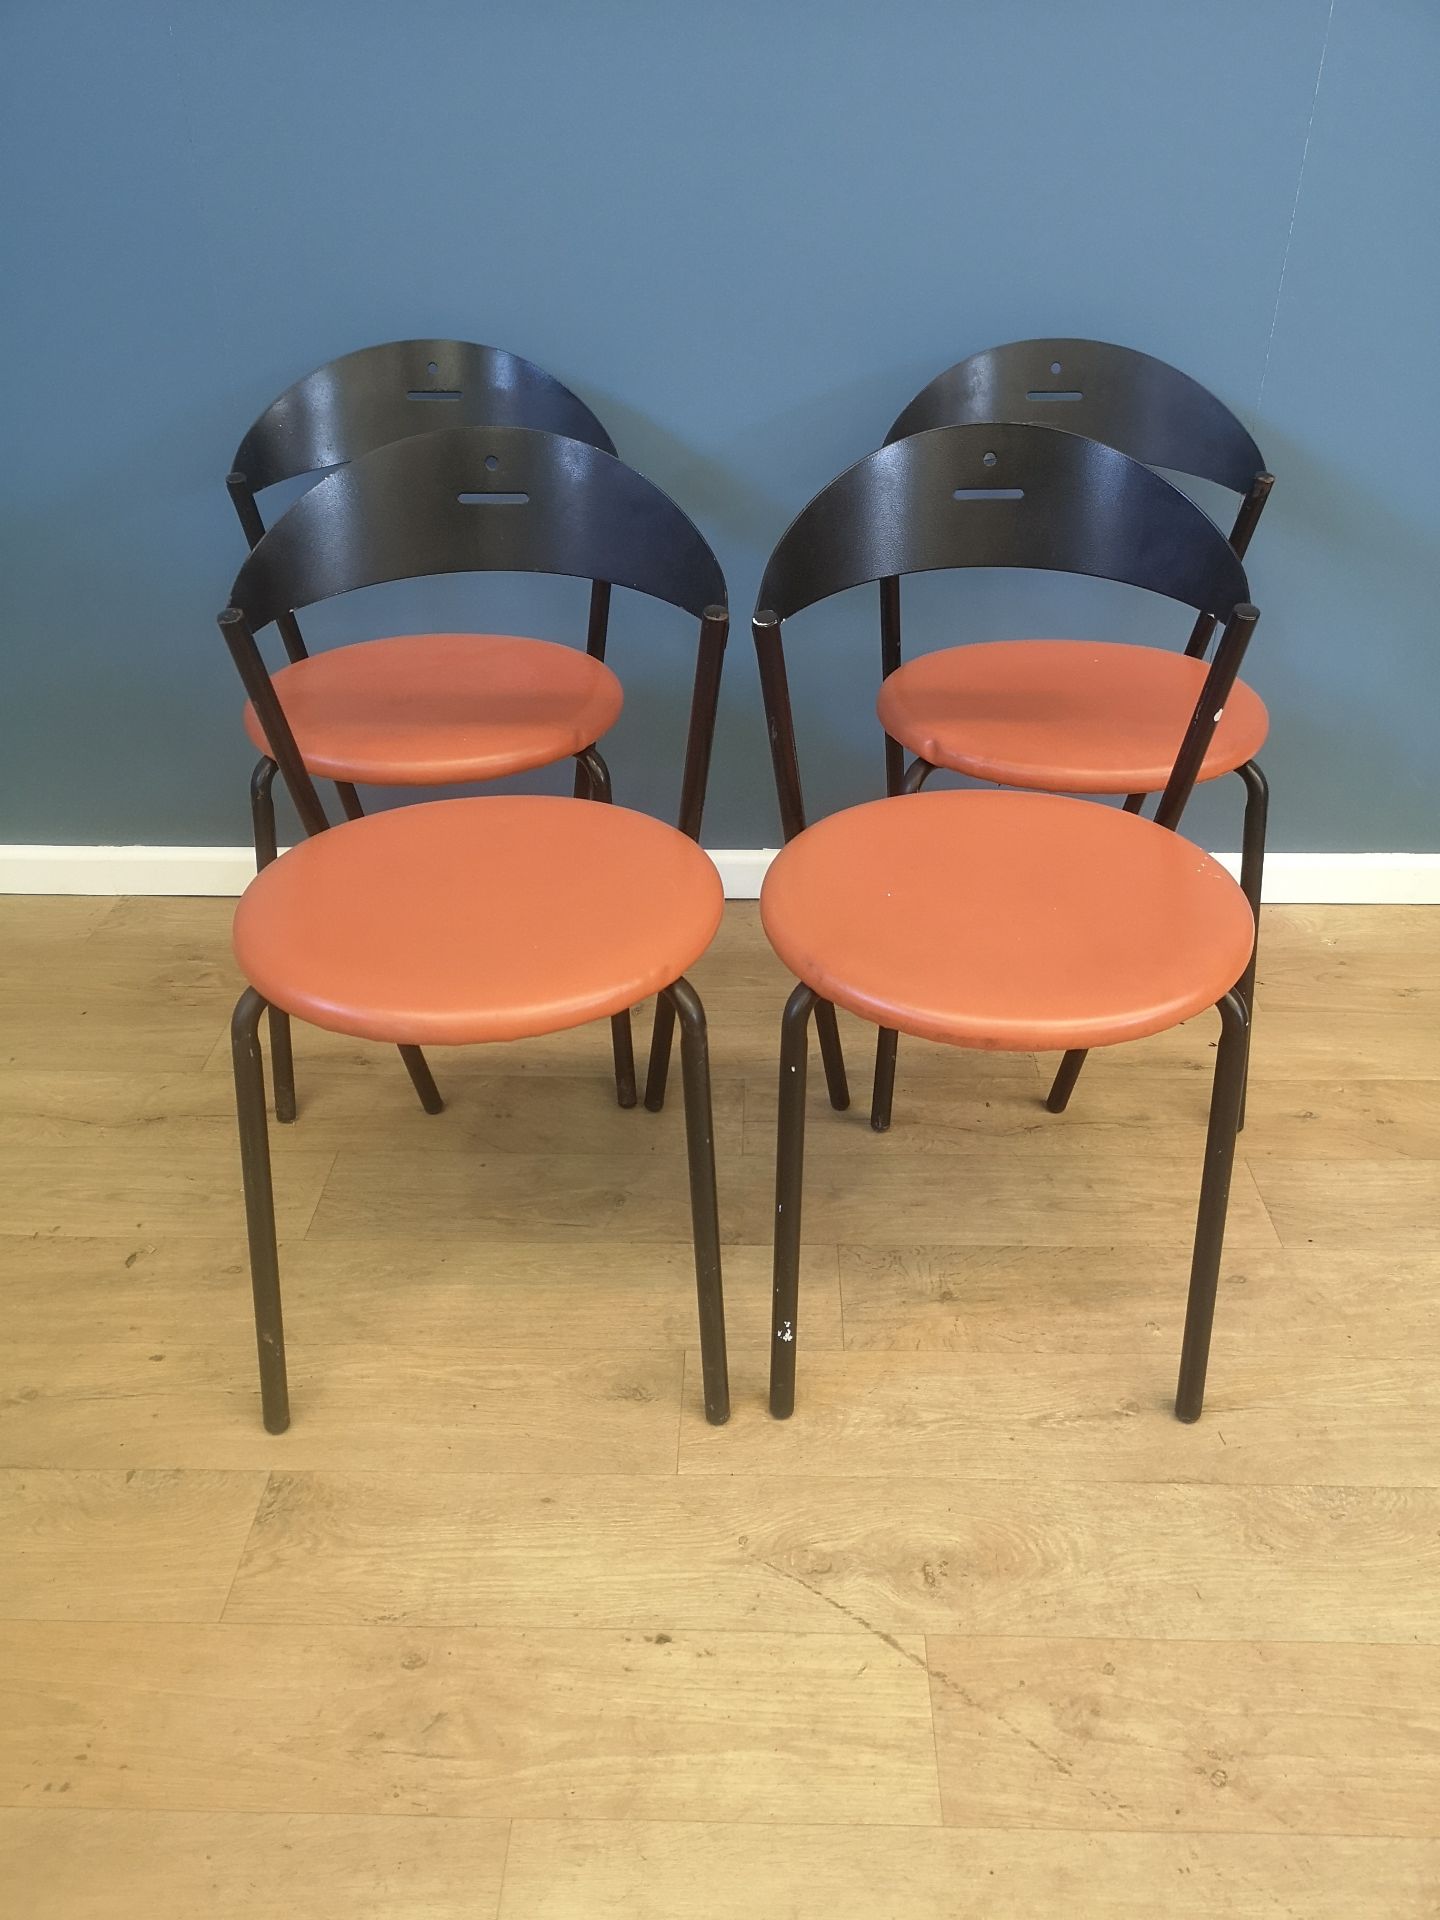 Four FlyLine dining chairs